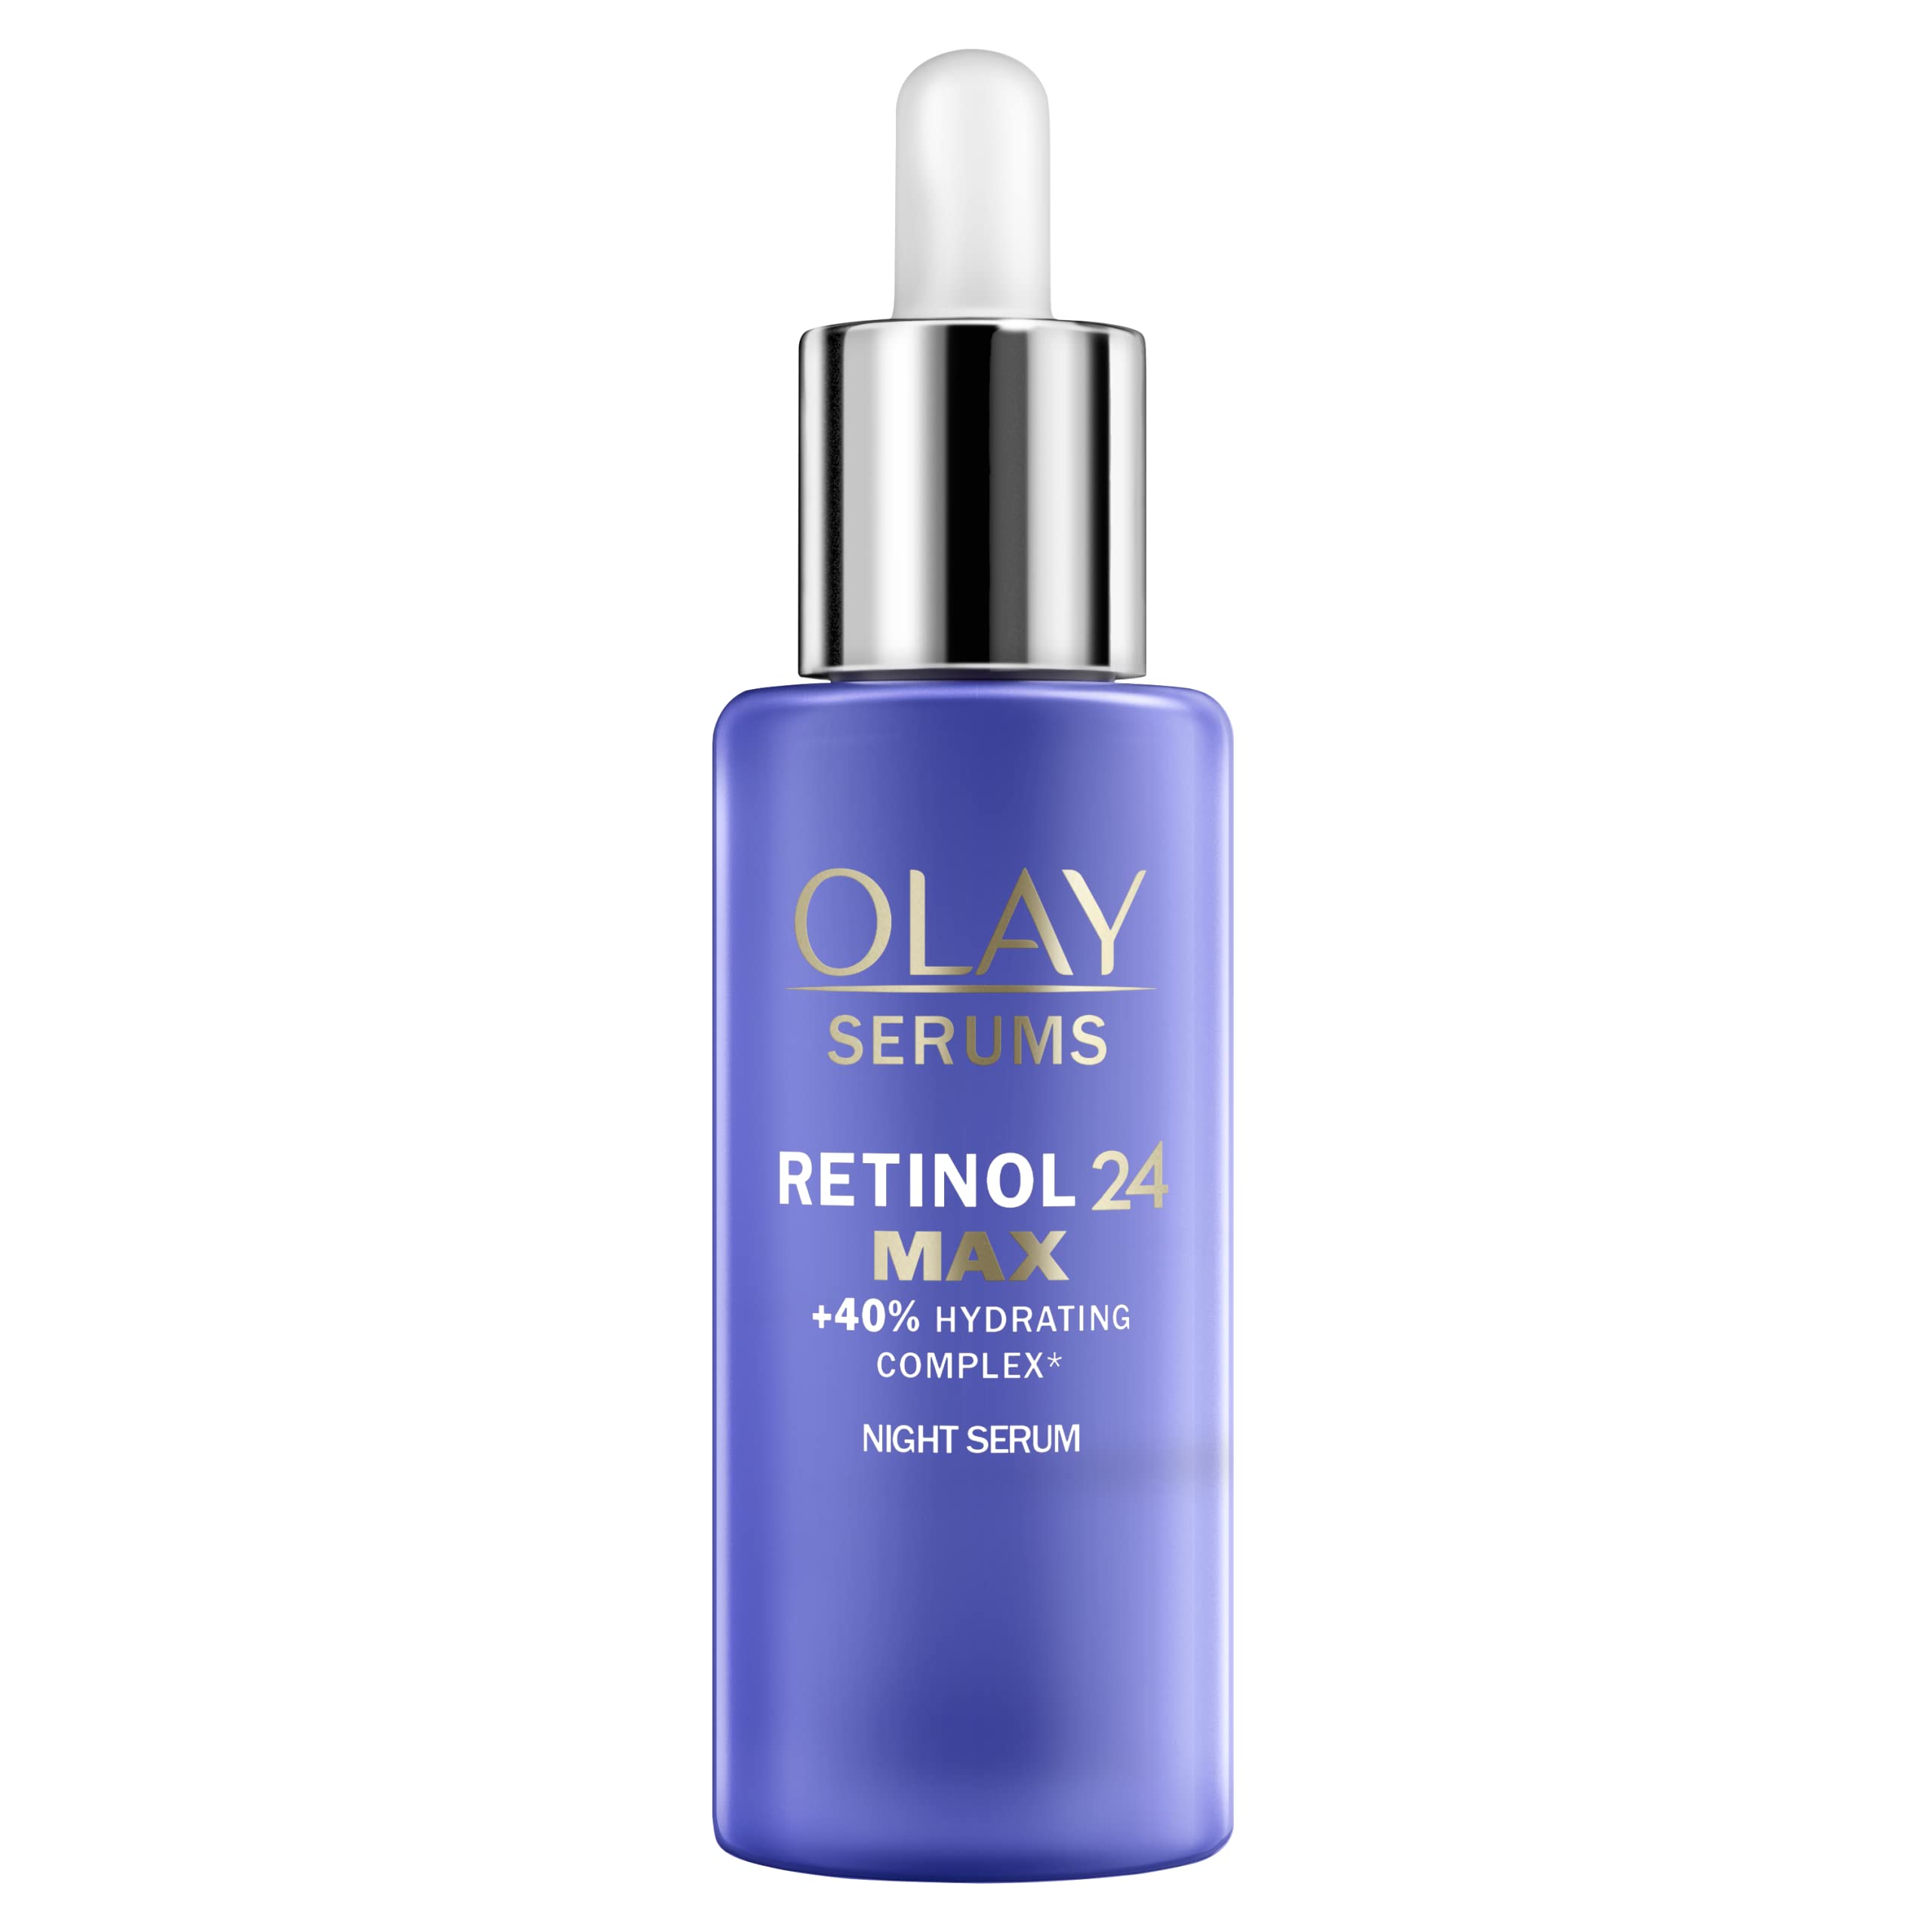 Olay Retinol 24 MAX Night Serum With 40% More Retinol Complex, Advanced Anti-Ageing Face Serum For Firmer Skin, Reduces Wrinkles, Fine Lines And Pigmentation, Olay's Strongest Retinoid Complex, 40 ml